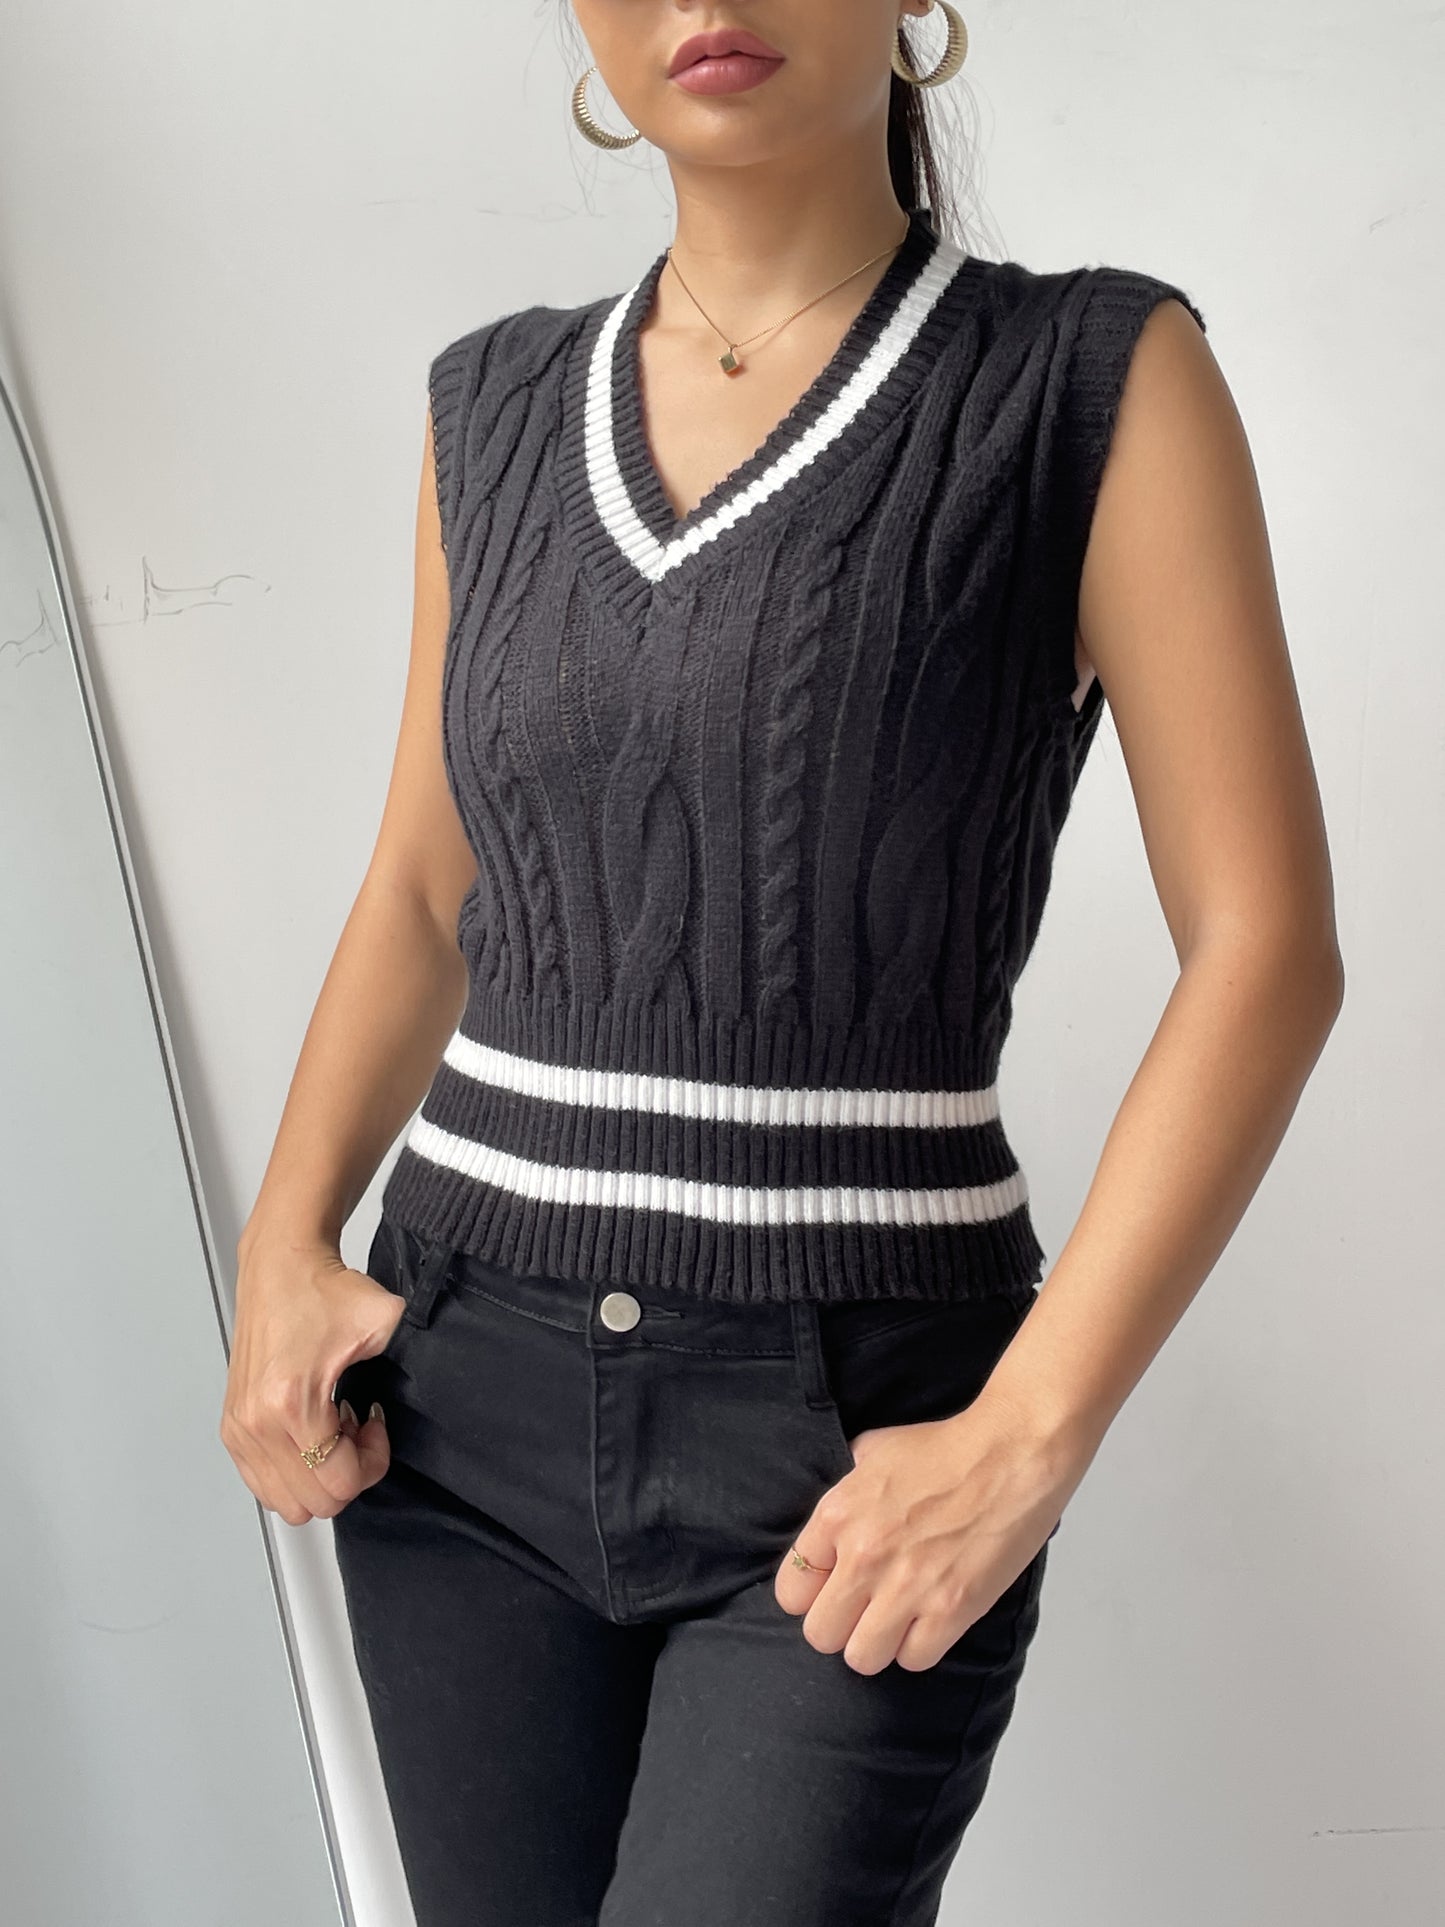 Antmvs Striped V Neck Cable Knit Vest, Casual Sleeveless Sweater For Spring & Fall, Women's Clothing